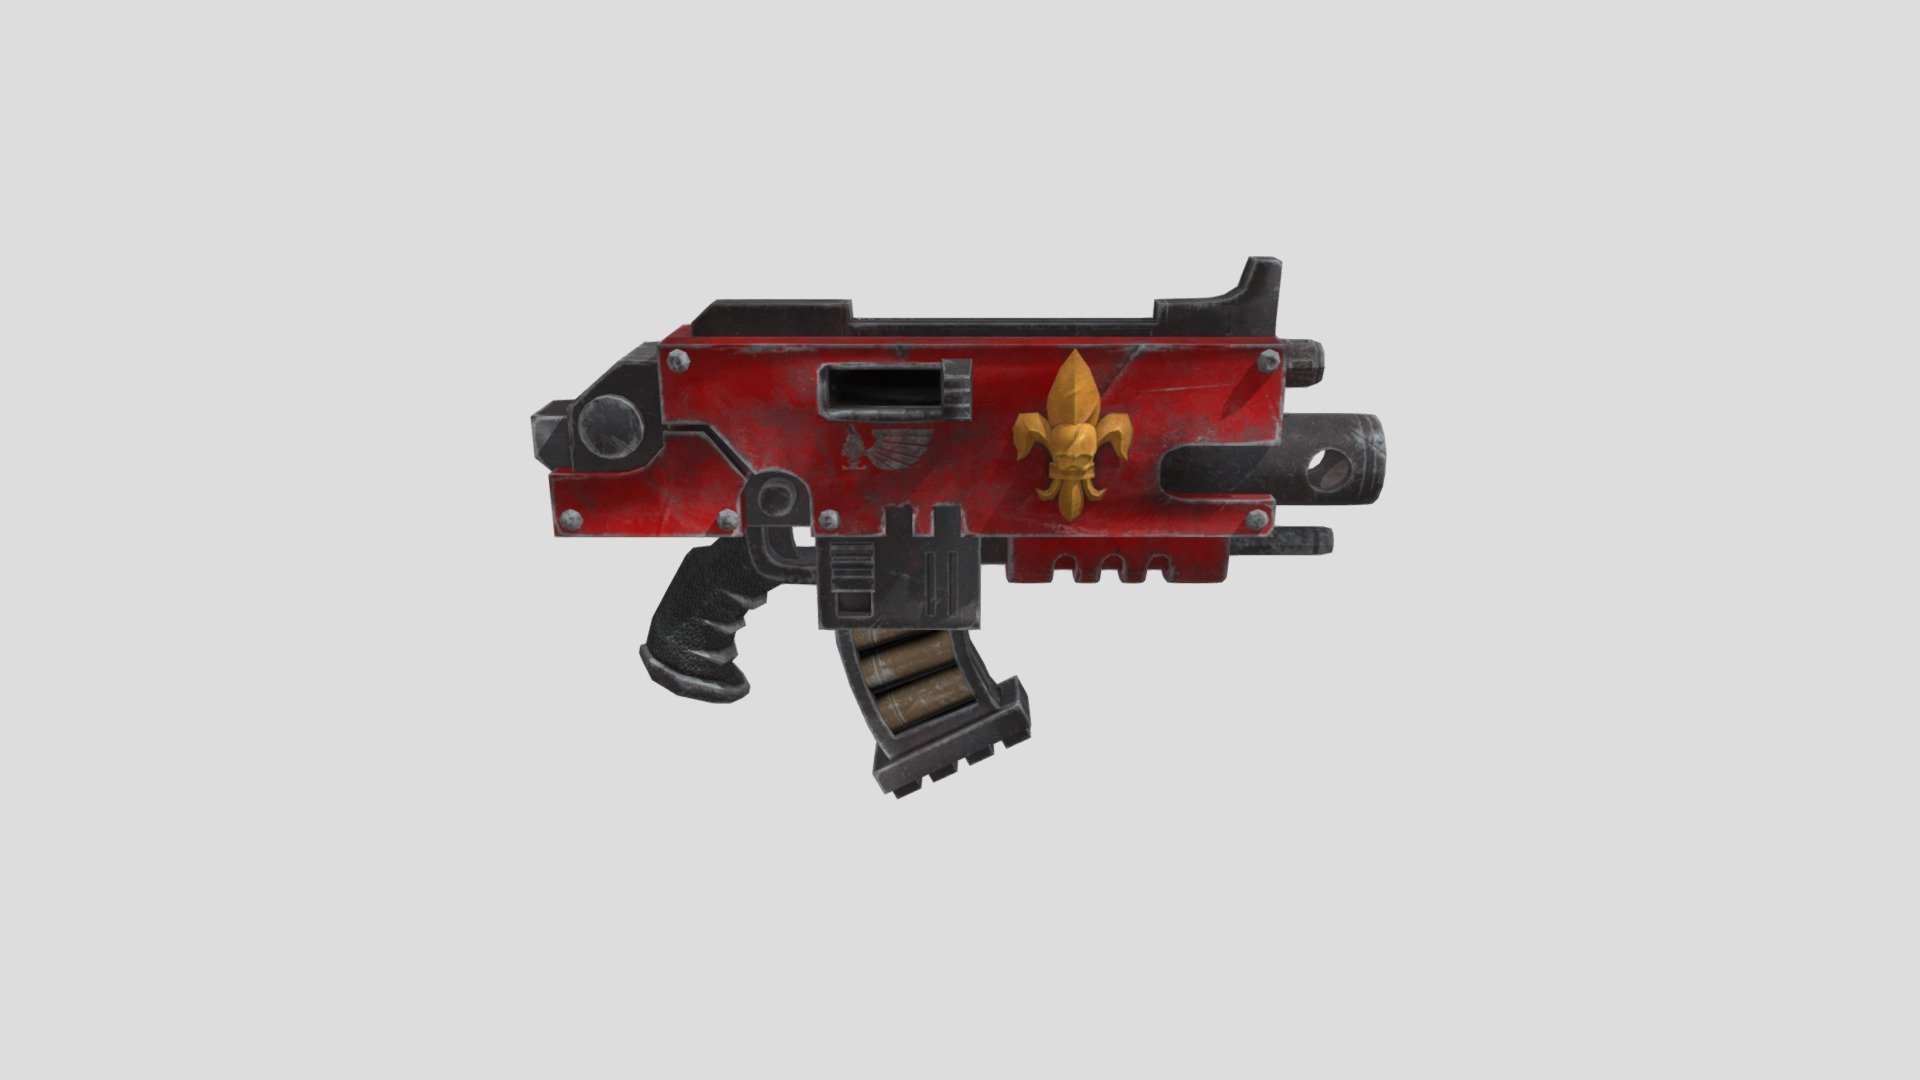 A model of the famous boltgun for the Adepta sororitas of Warhammer 40k. low poly model. modeled in blender and textured in substance painter 3d model